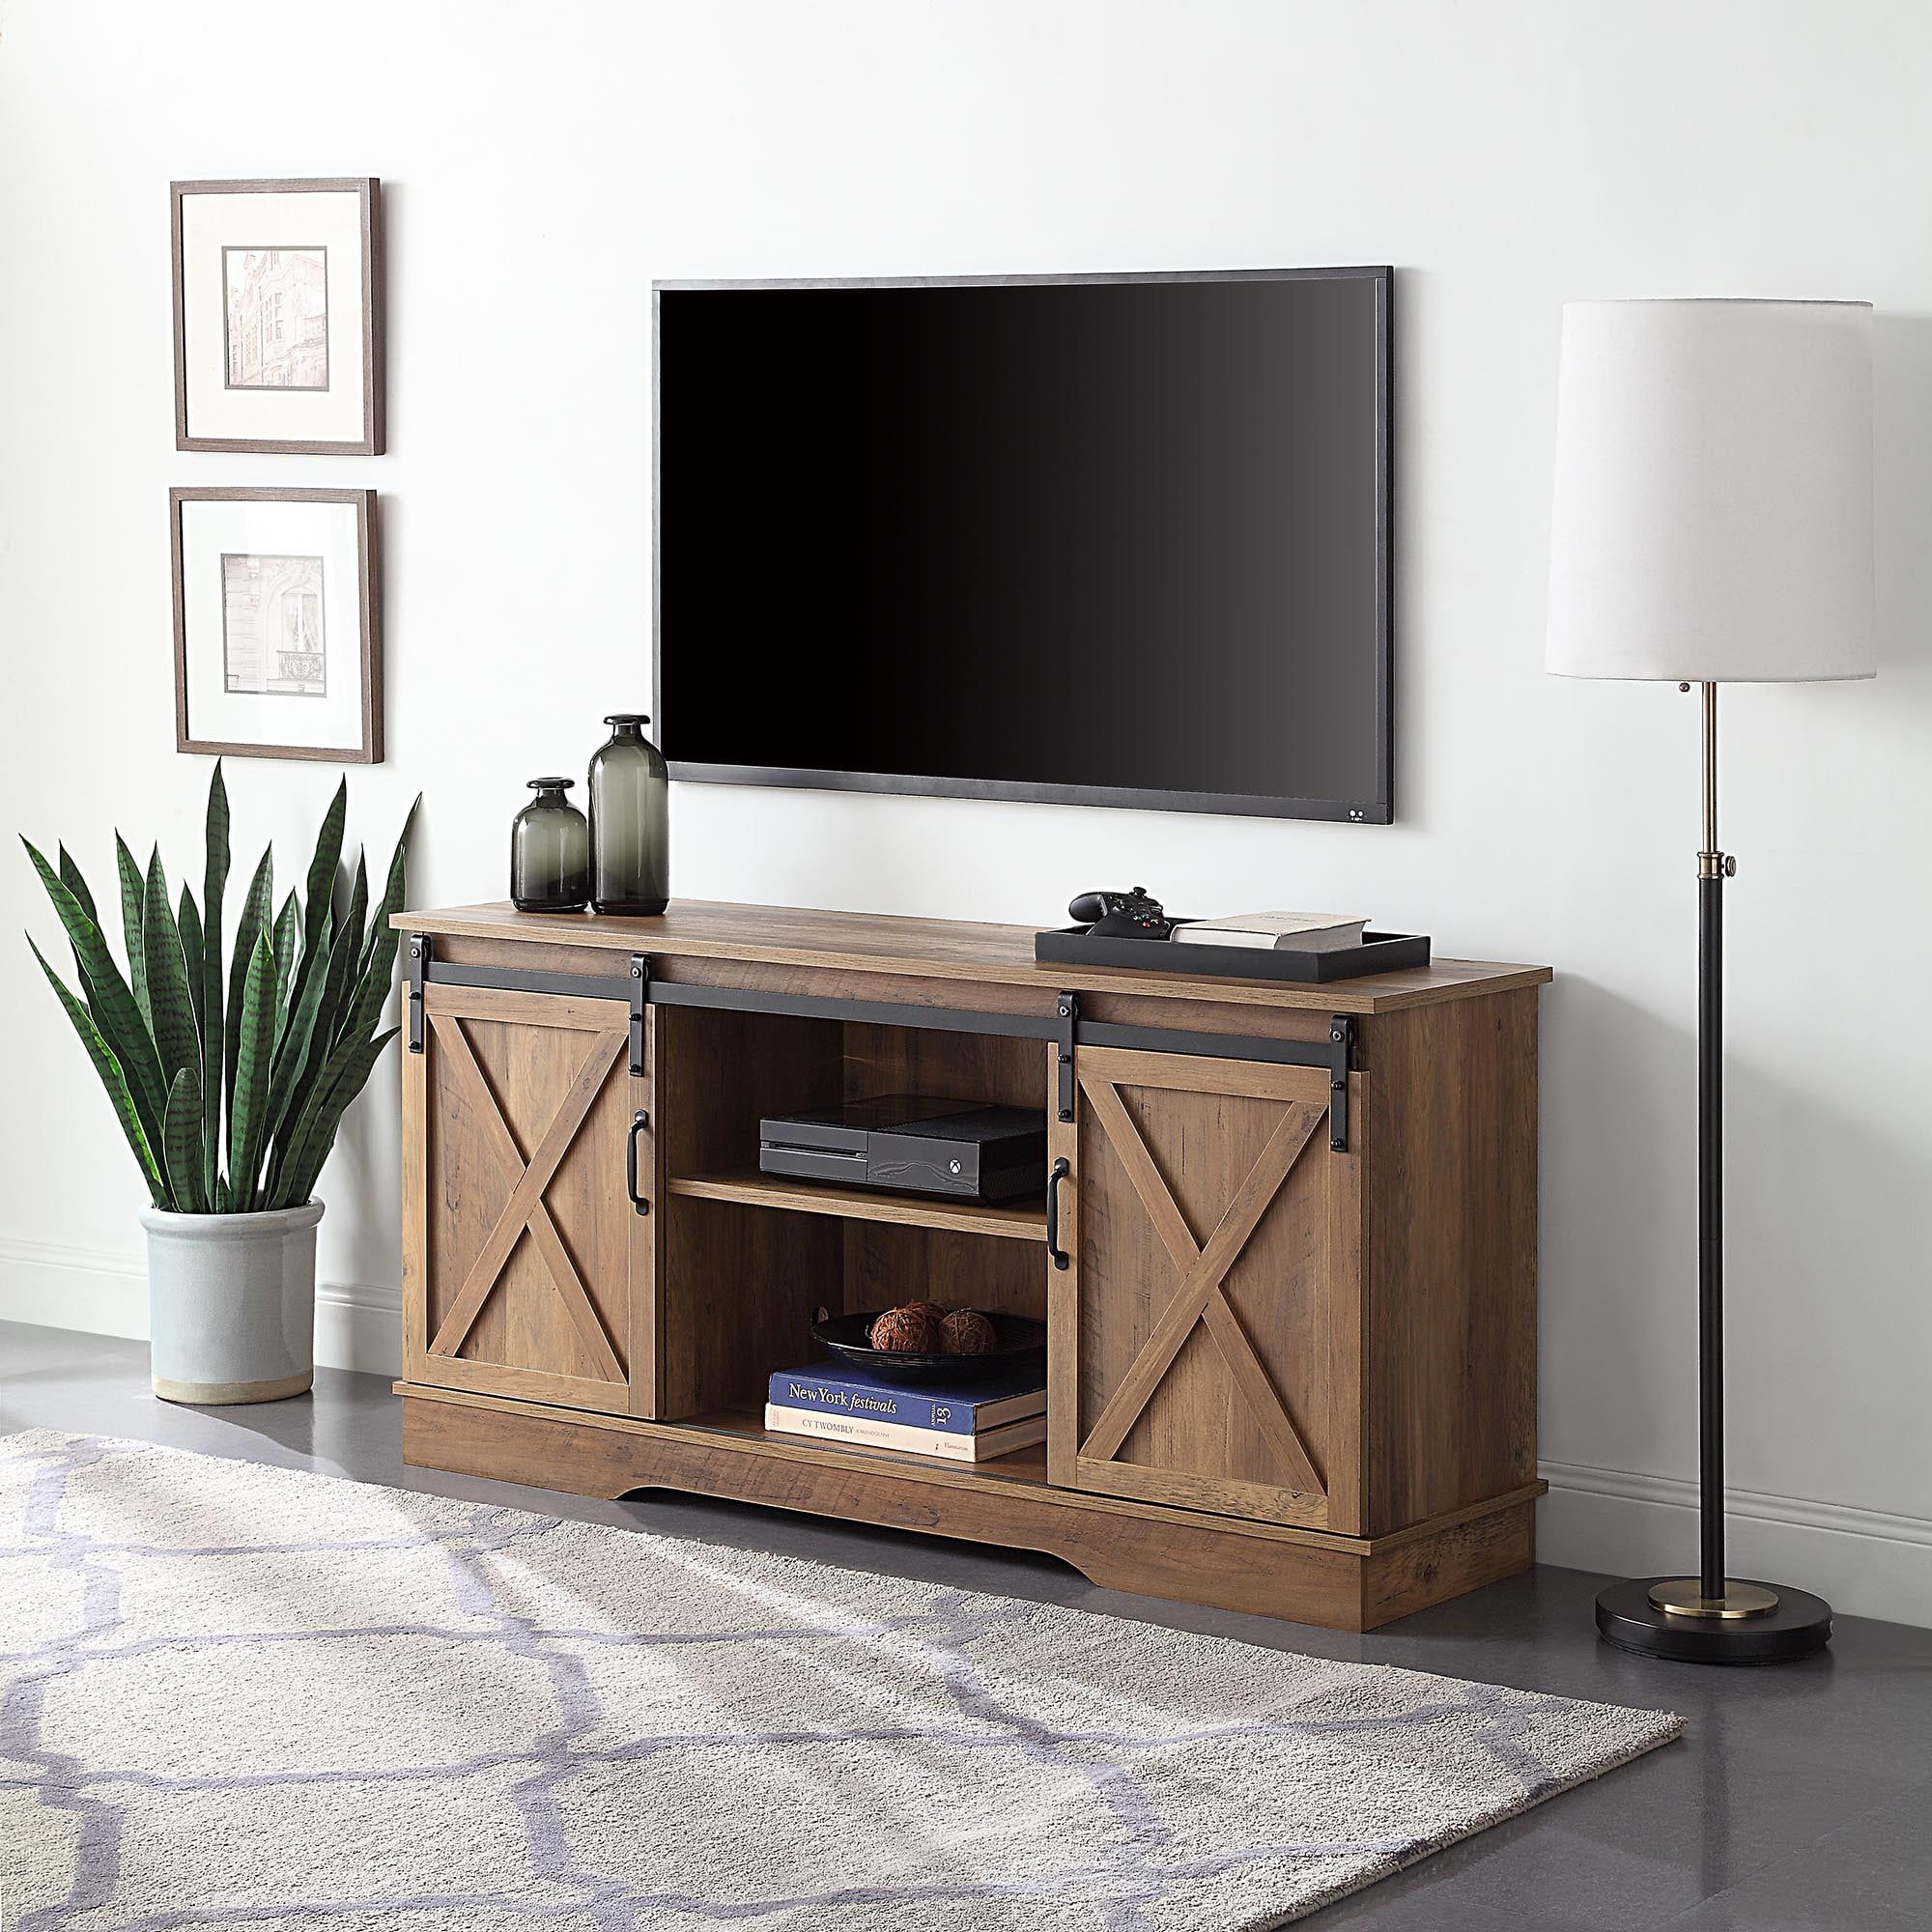 Belleze Modern Farmhouse Style 58 Inch Tv Stand With Sliding Barn Door Inside Farmhouse Tv Stands (Gallery 18 of 20)